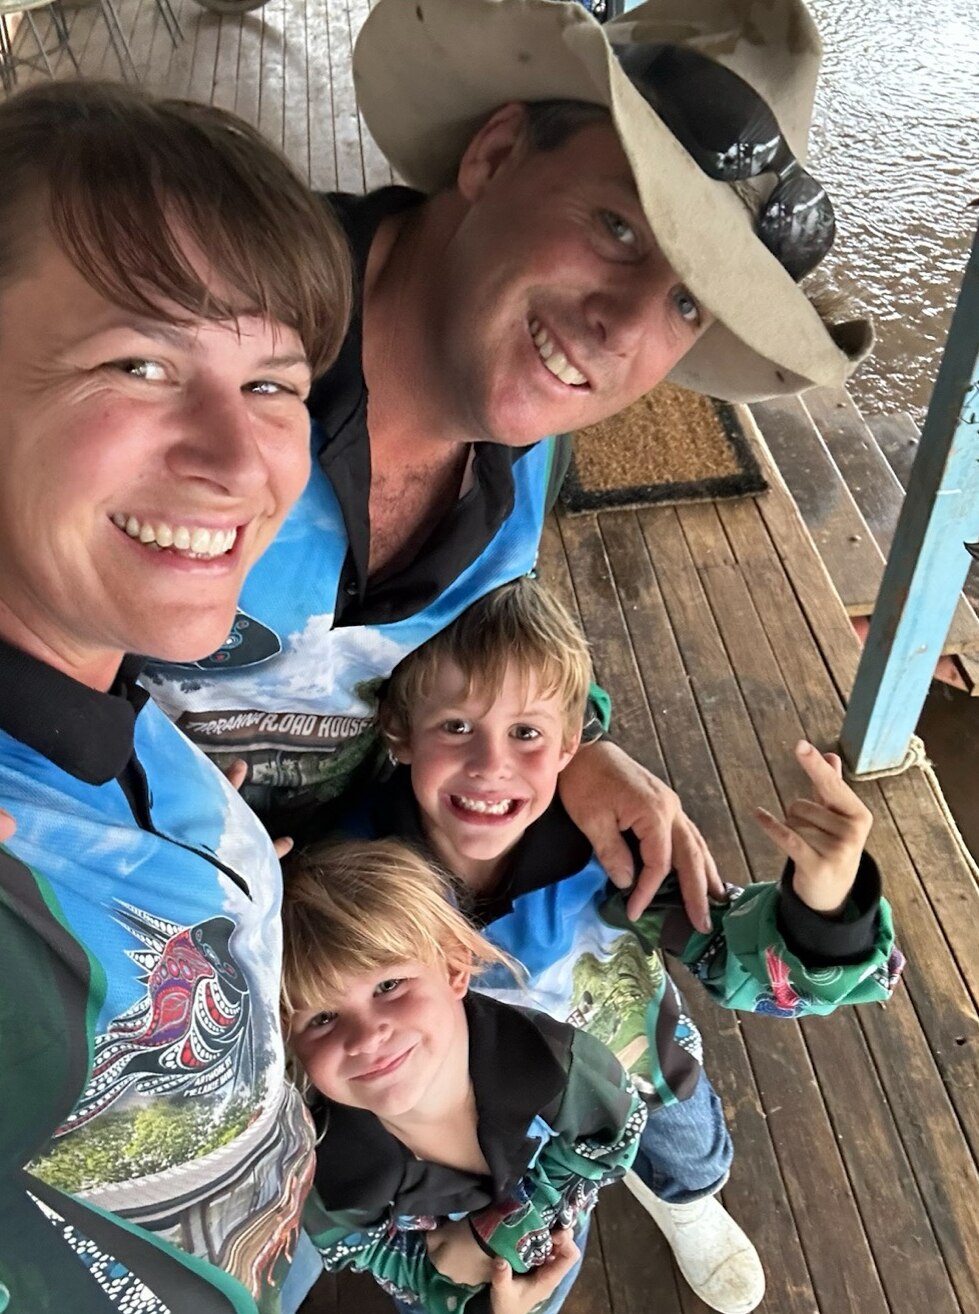 A mother, father and young son and daughter wear fishing shirts and smile directly at the camera